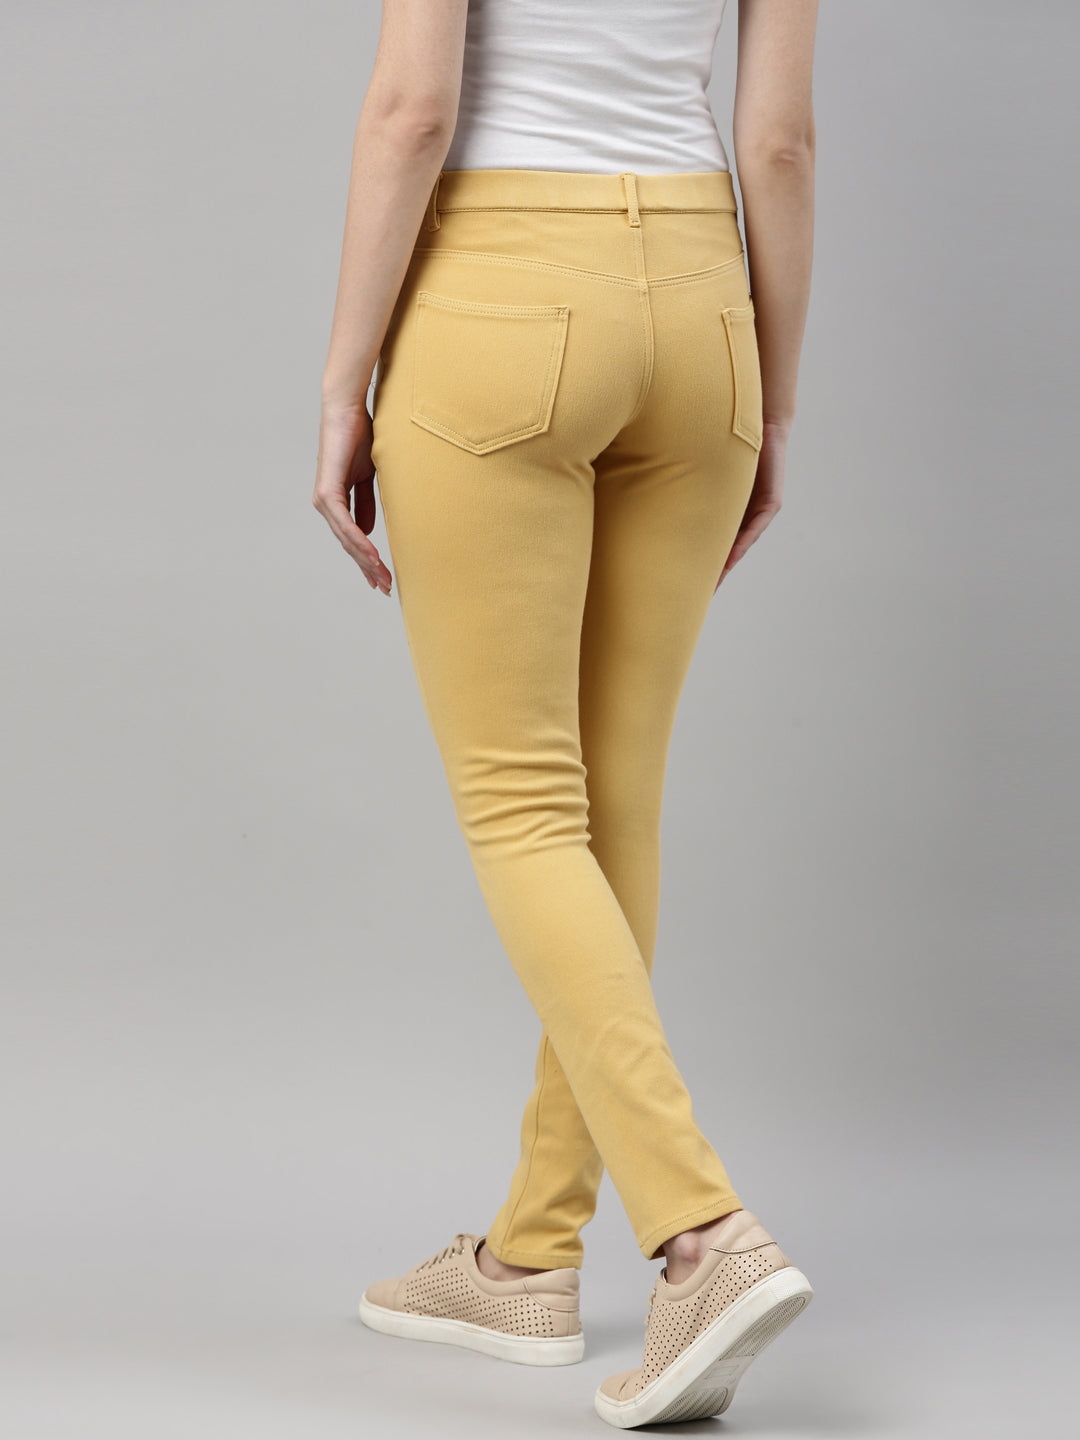 Women Solid White Super Stretch Jeggings